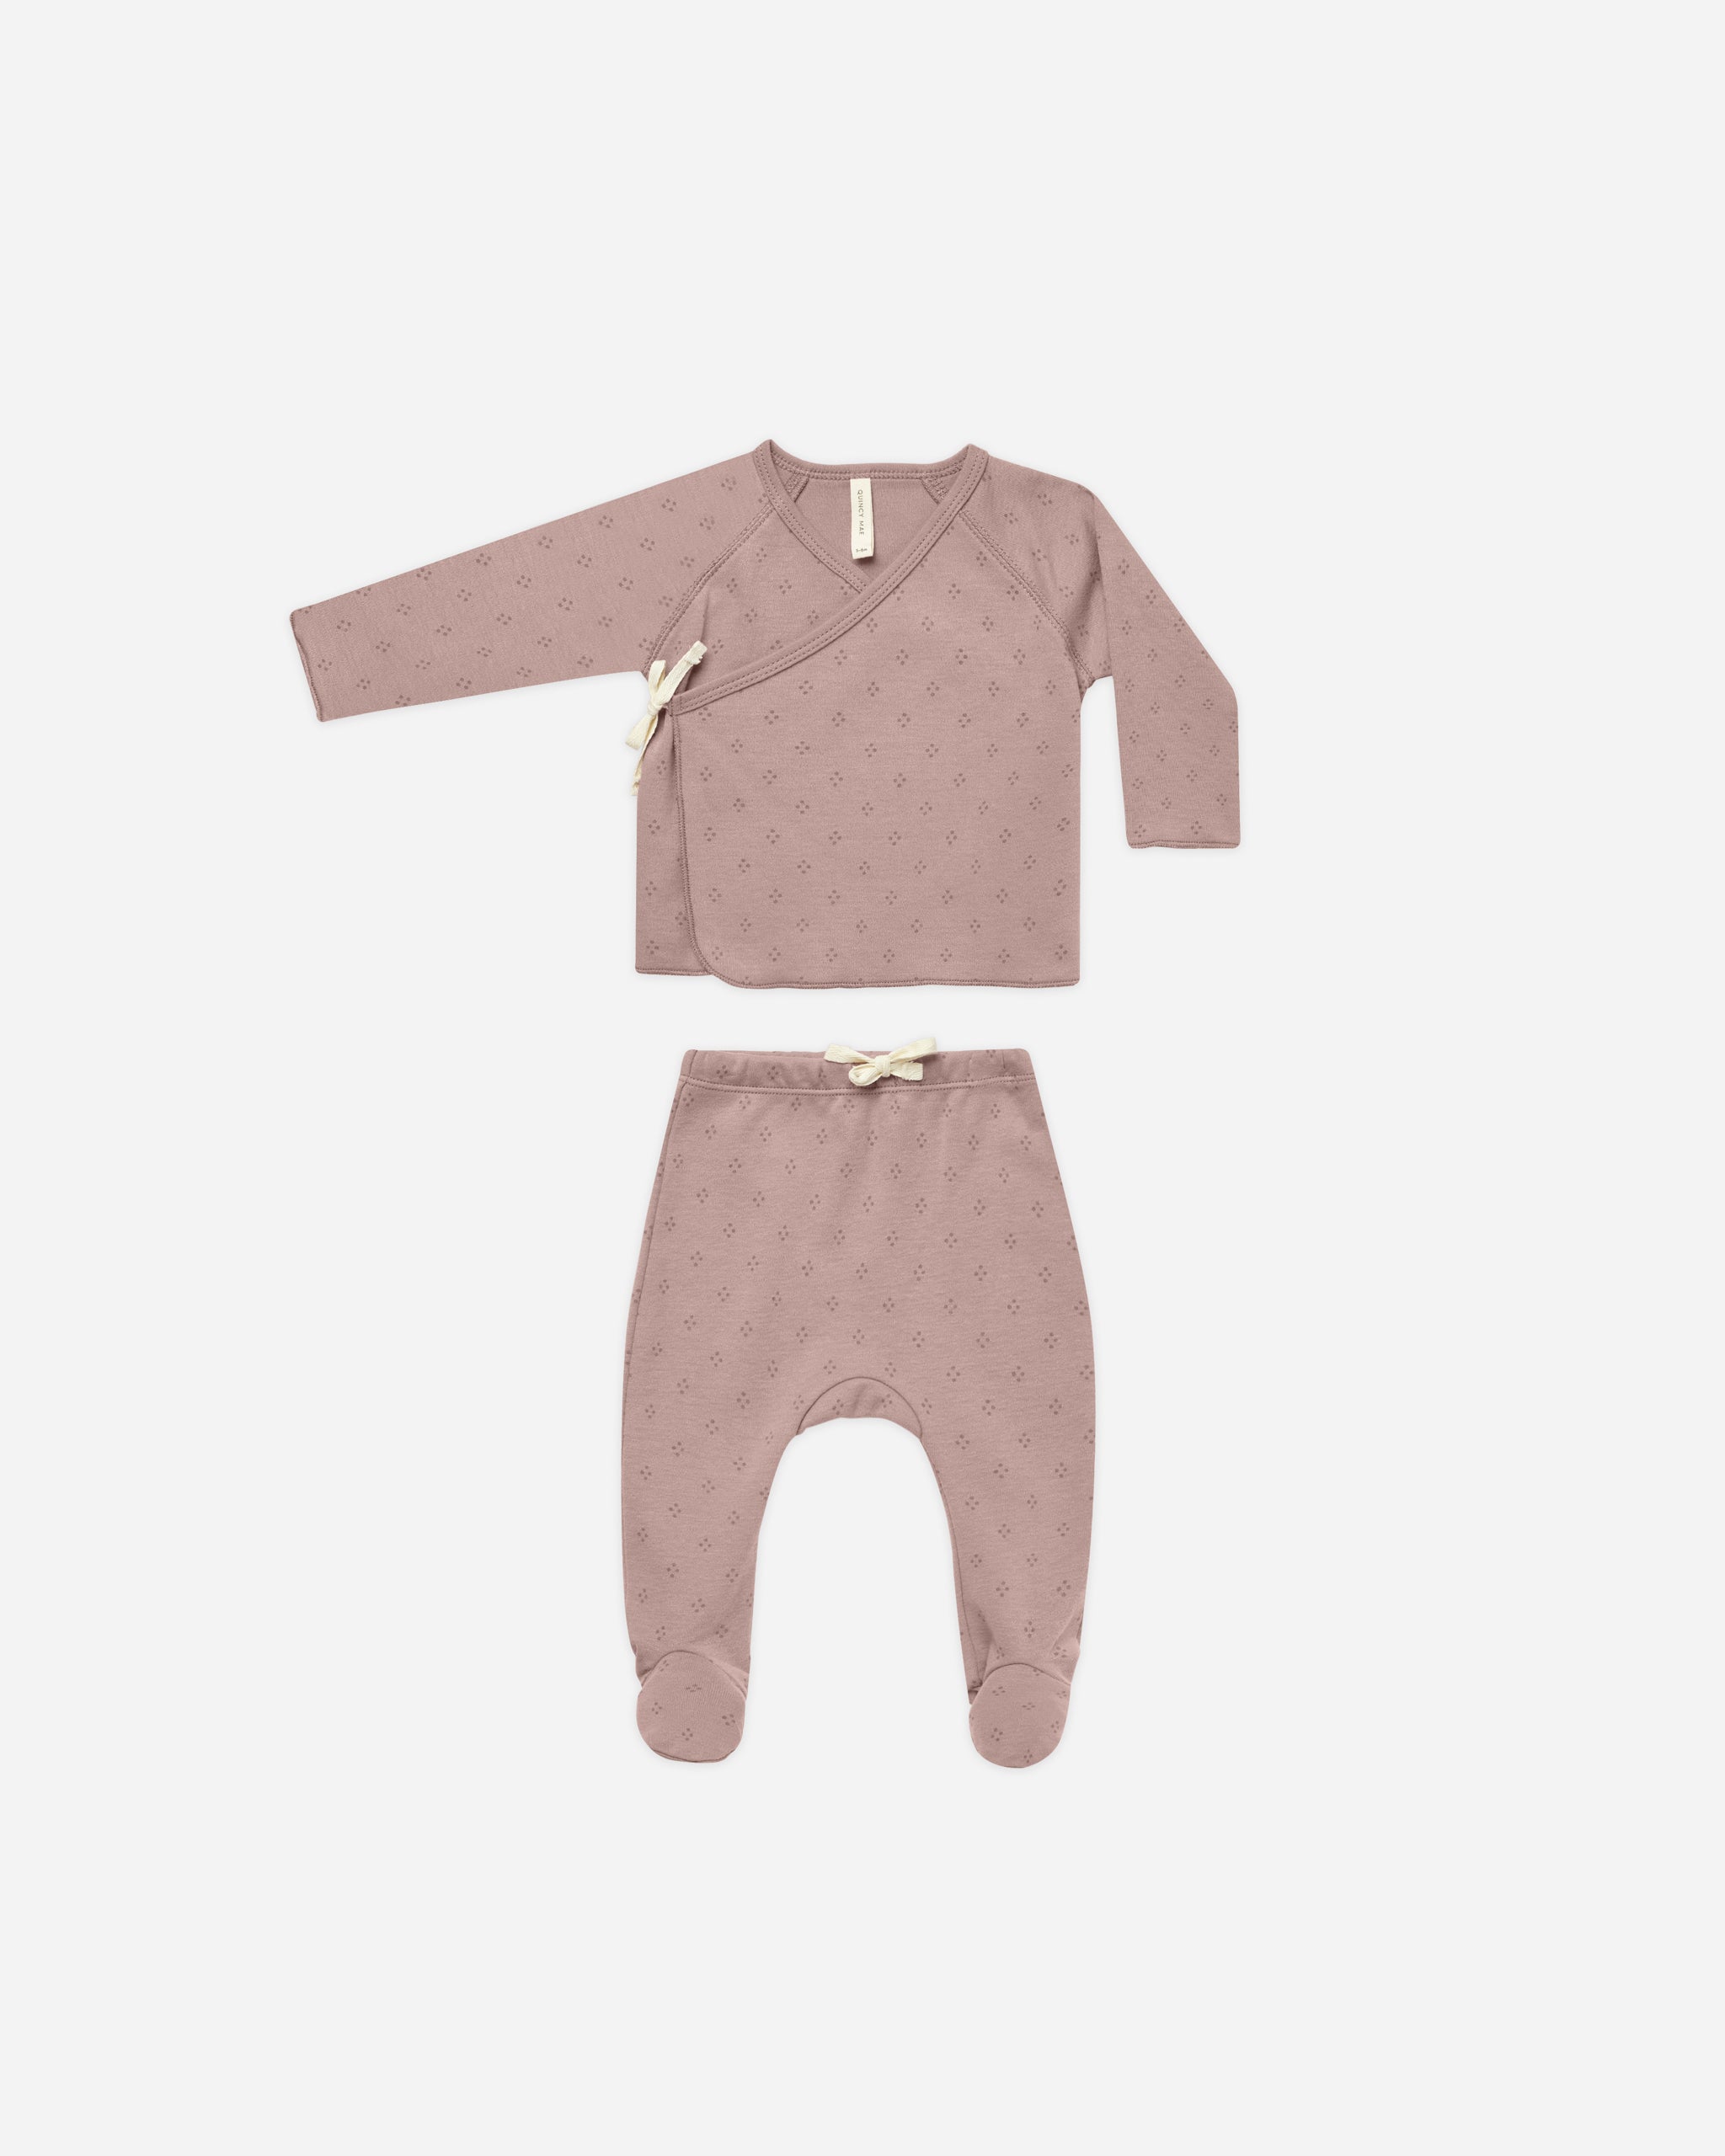 Wrap Top + Footed Pant Set || Dotty - Rylee + Cru | Kids Clothes | Trendy Baby Clothes | Modern Infant Outfits |